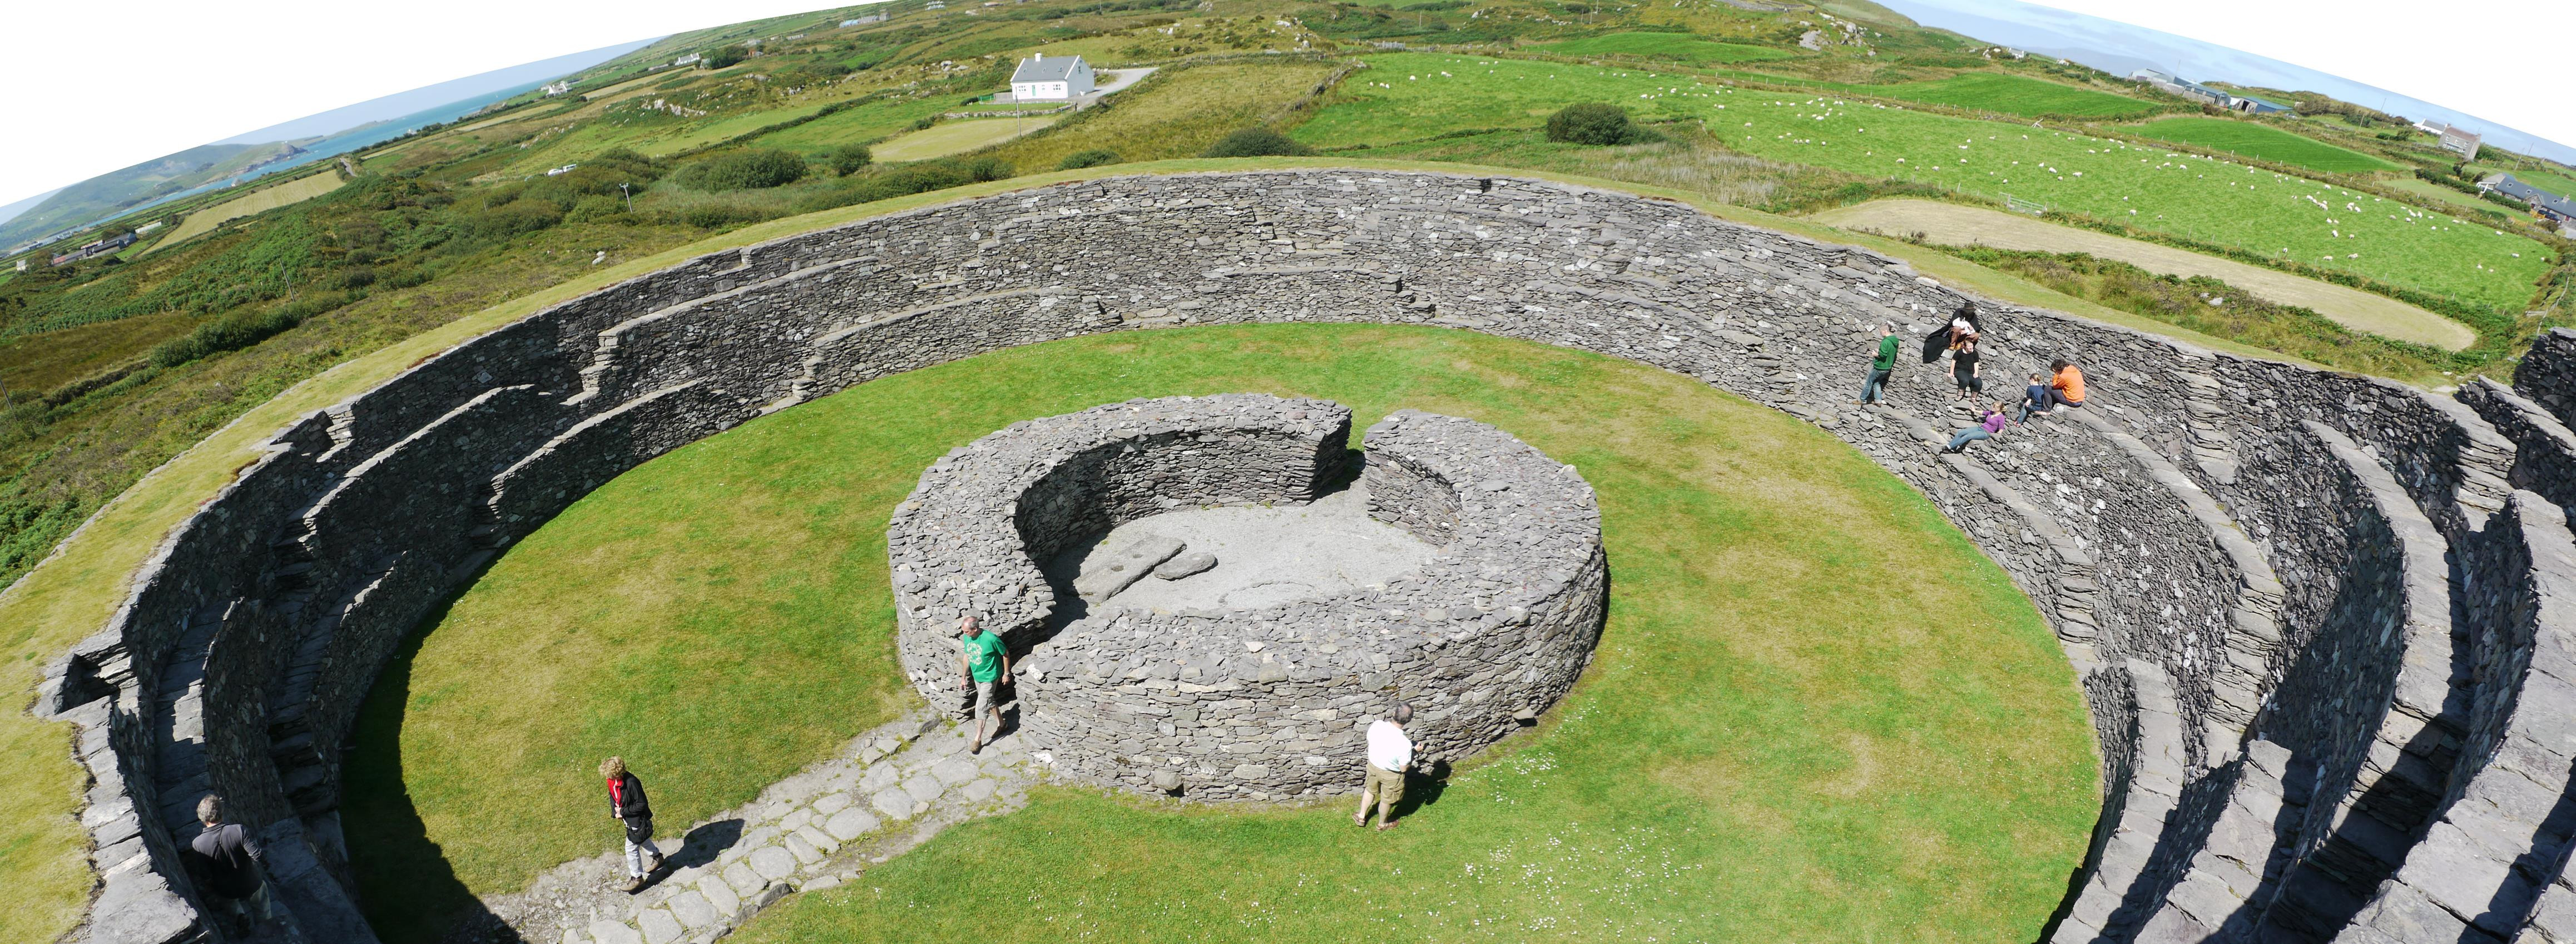 Cahergall Stone Fort, County Kerry